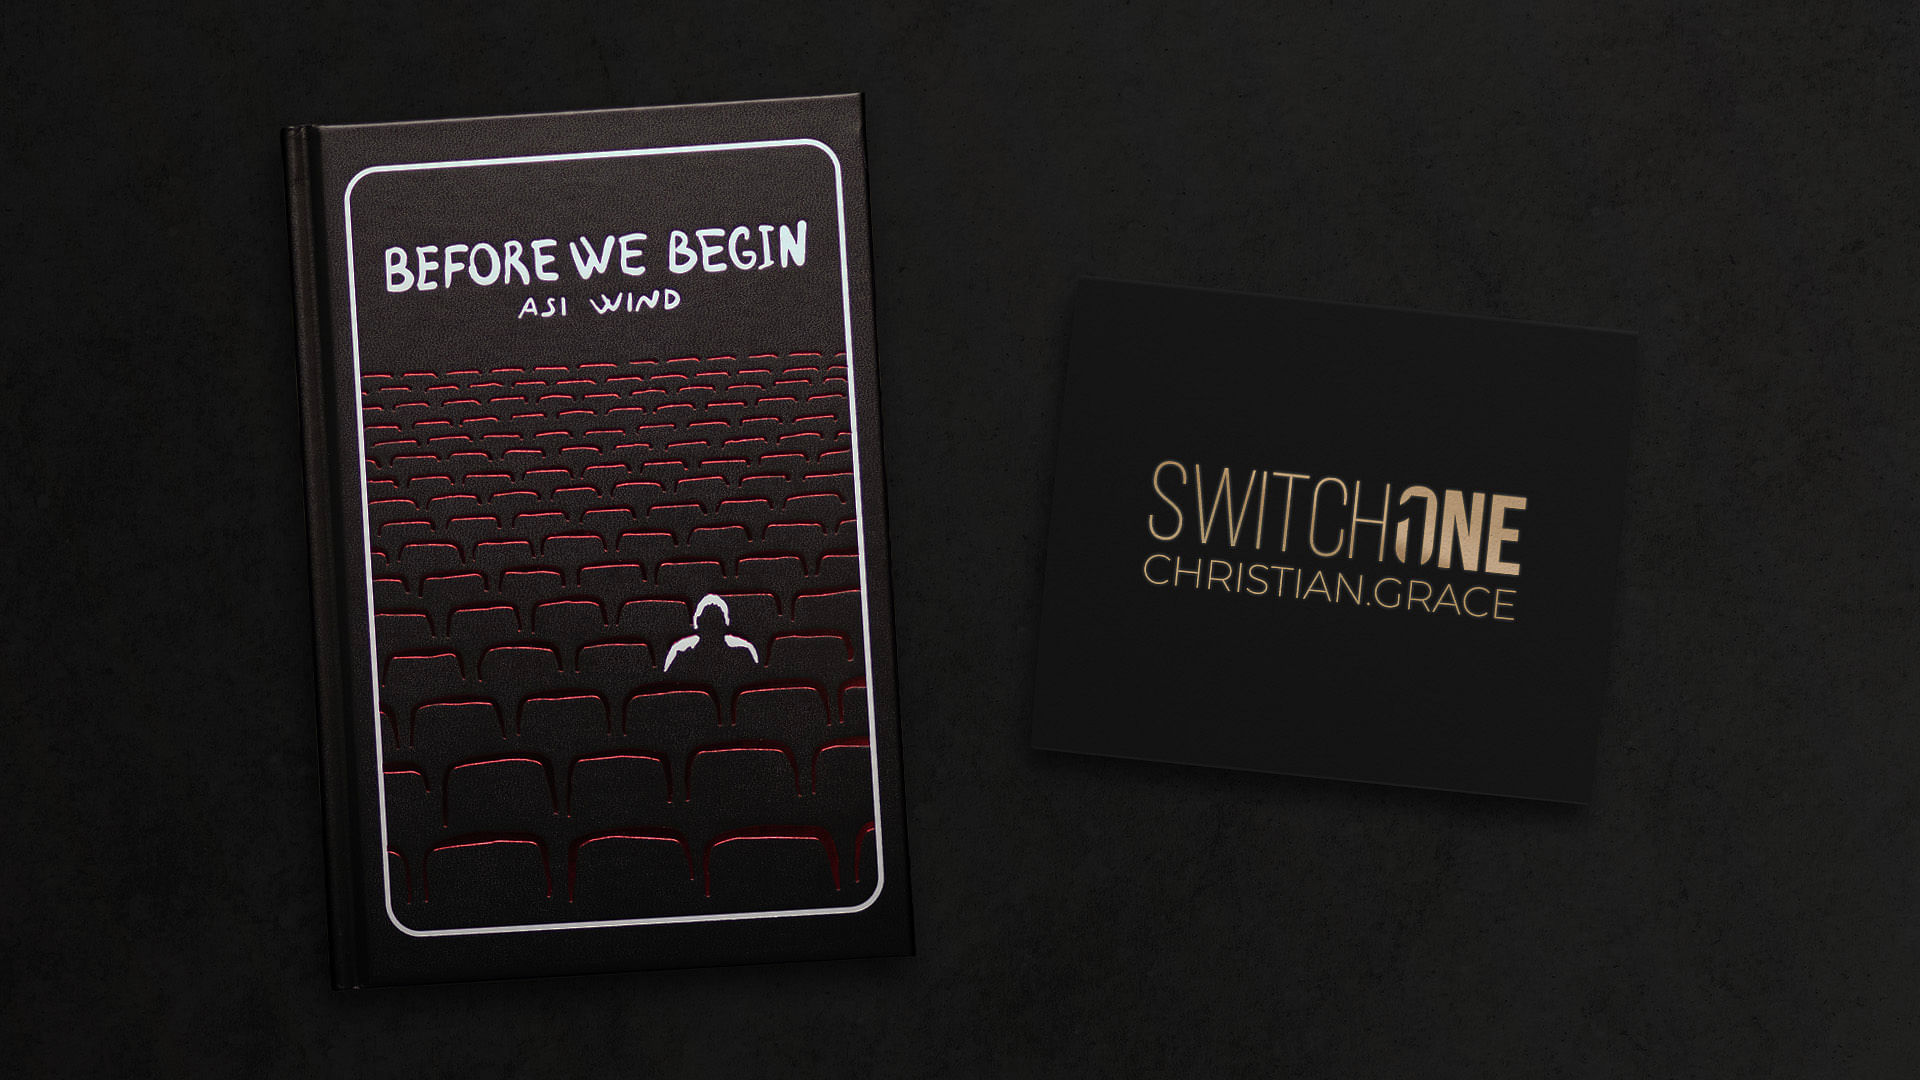 SwitchOne and Before We Begin